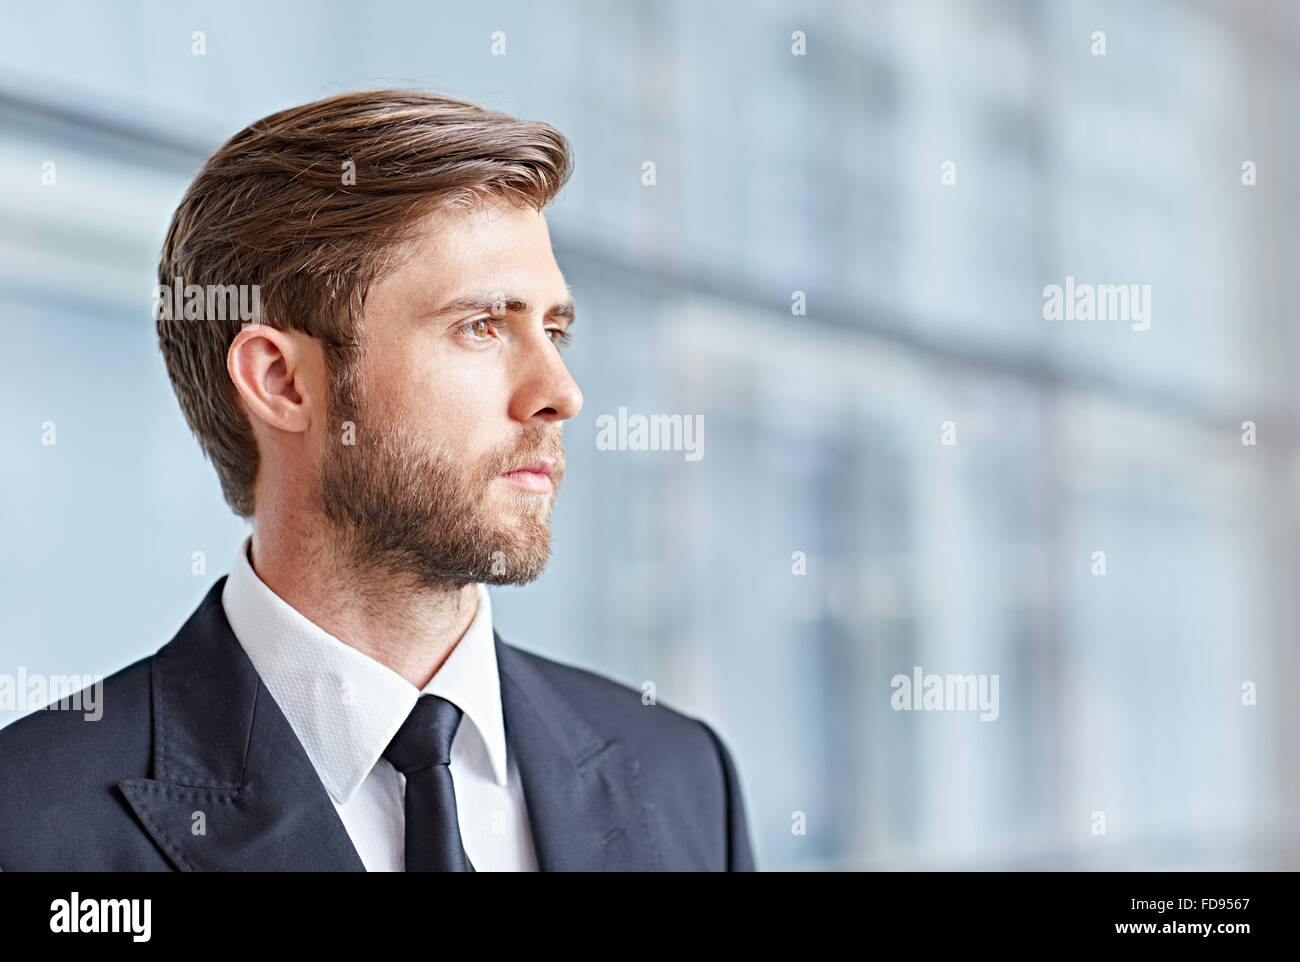 For serious insights into modern business Stock Photo